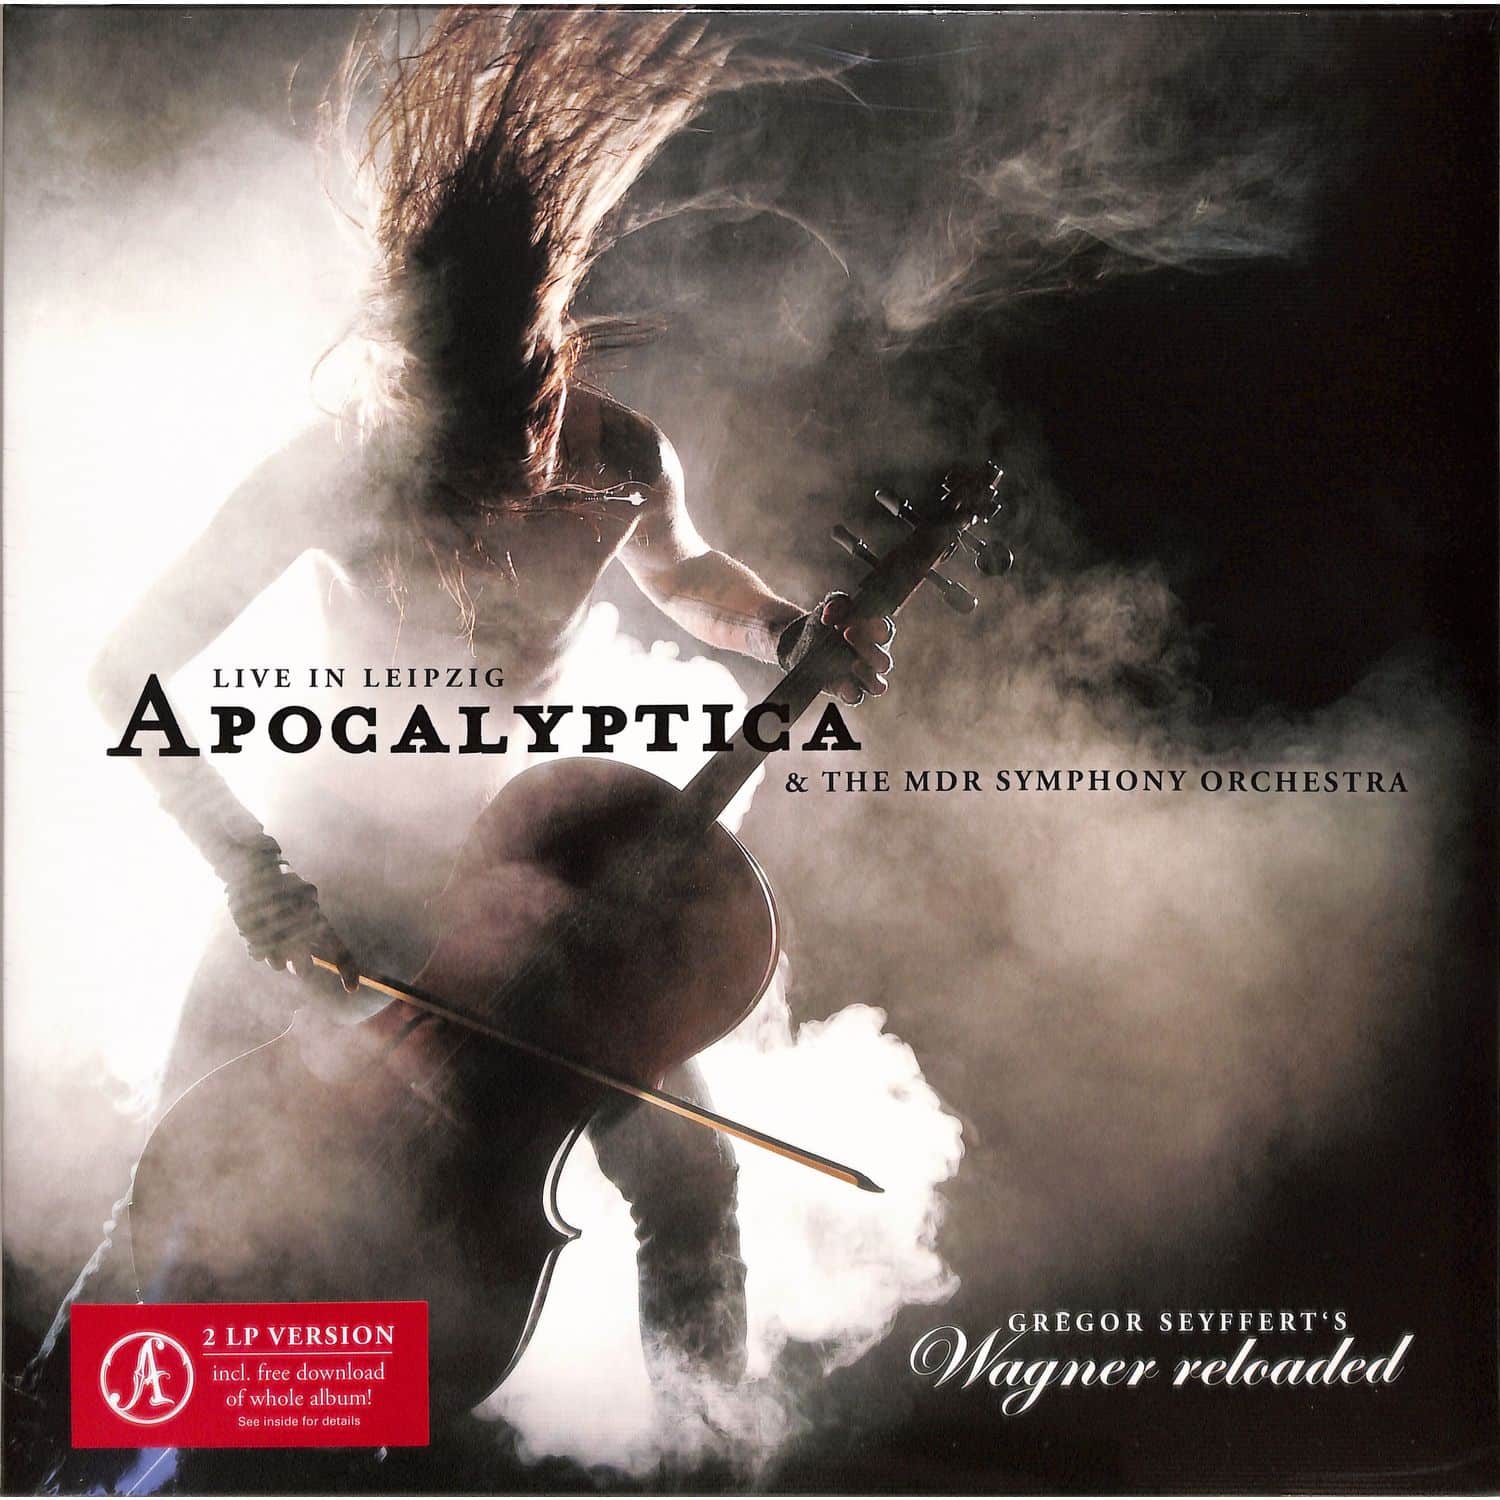 Apocalyptica - WAGNER RELOADED: LIVE IN LEIPZIG 